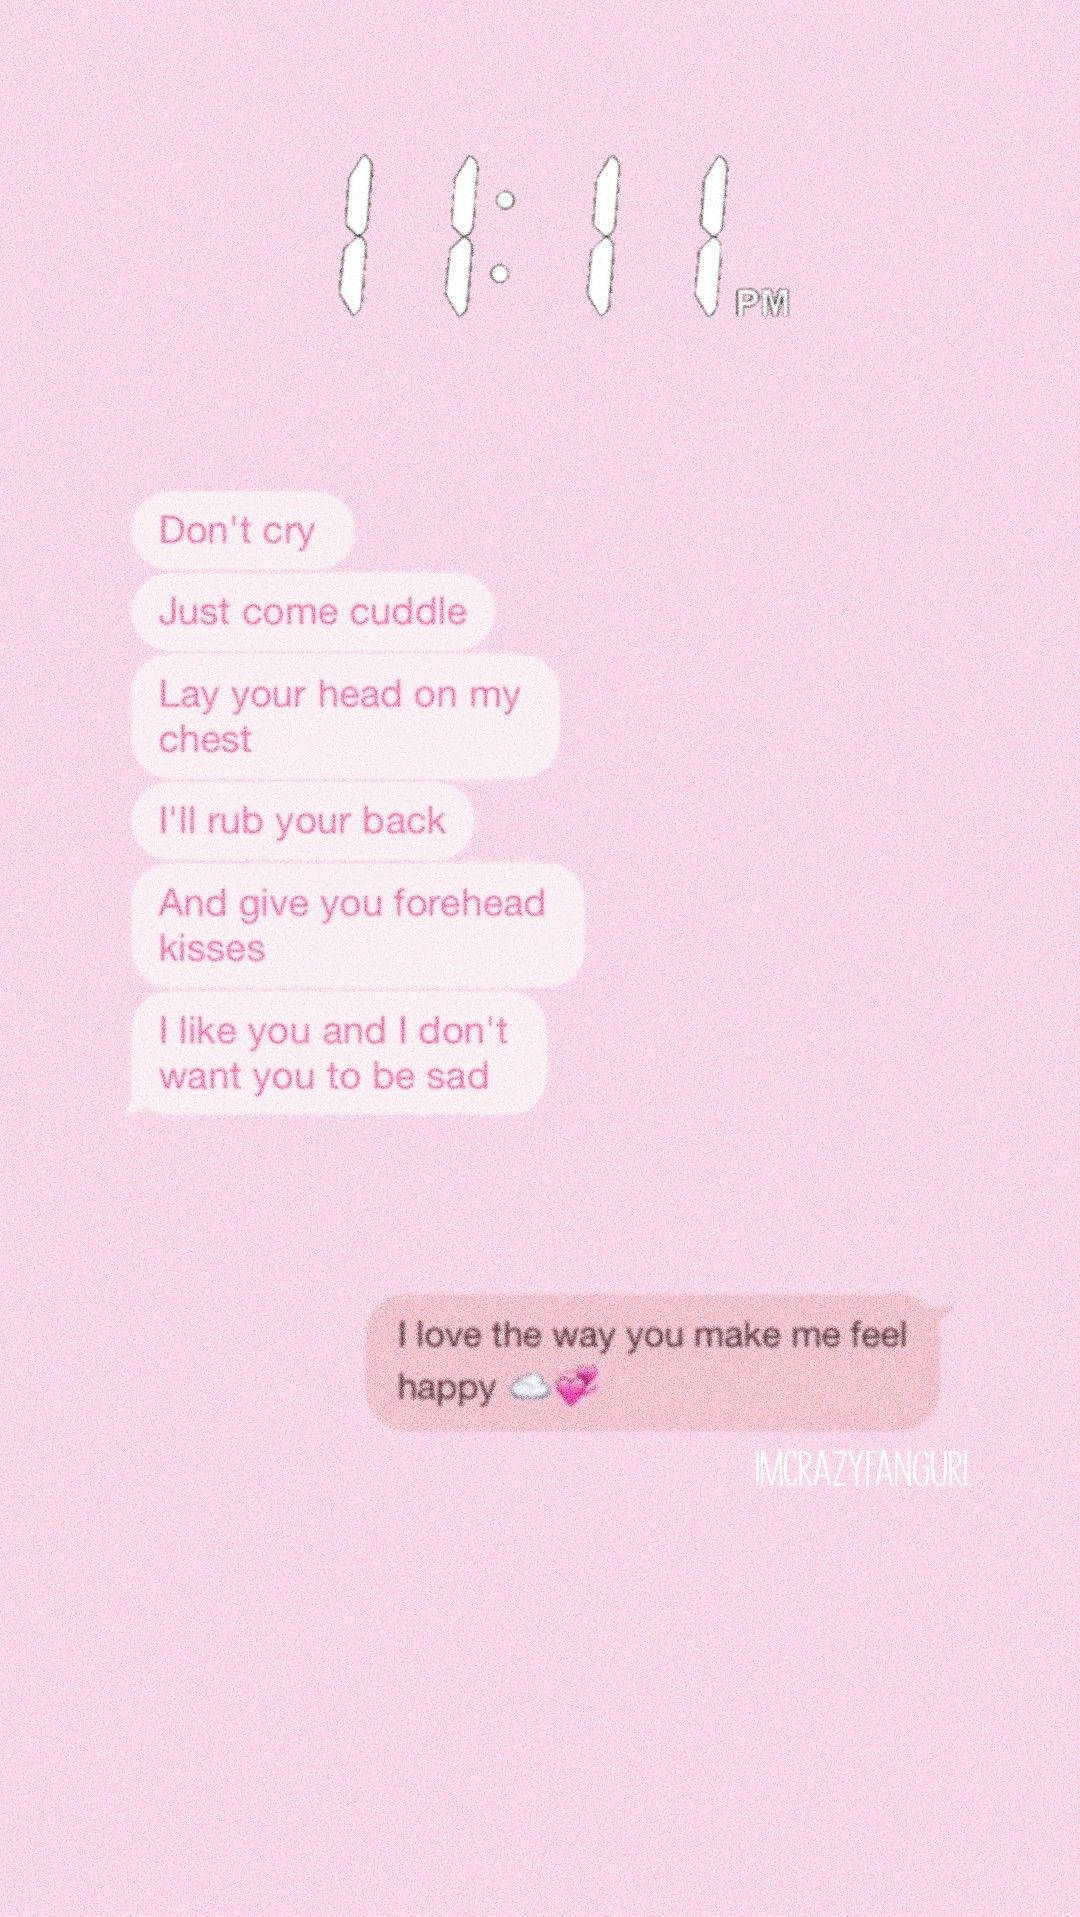 Cute Pink Aesthetic Sweet Text Message